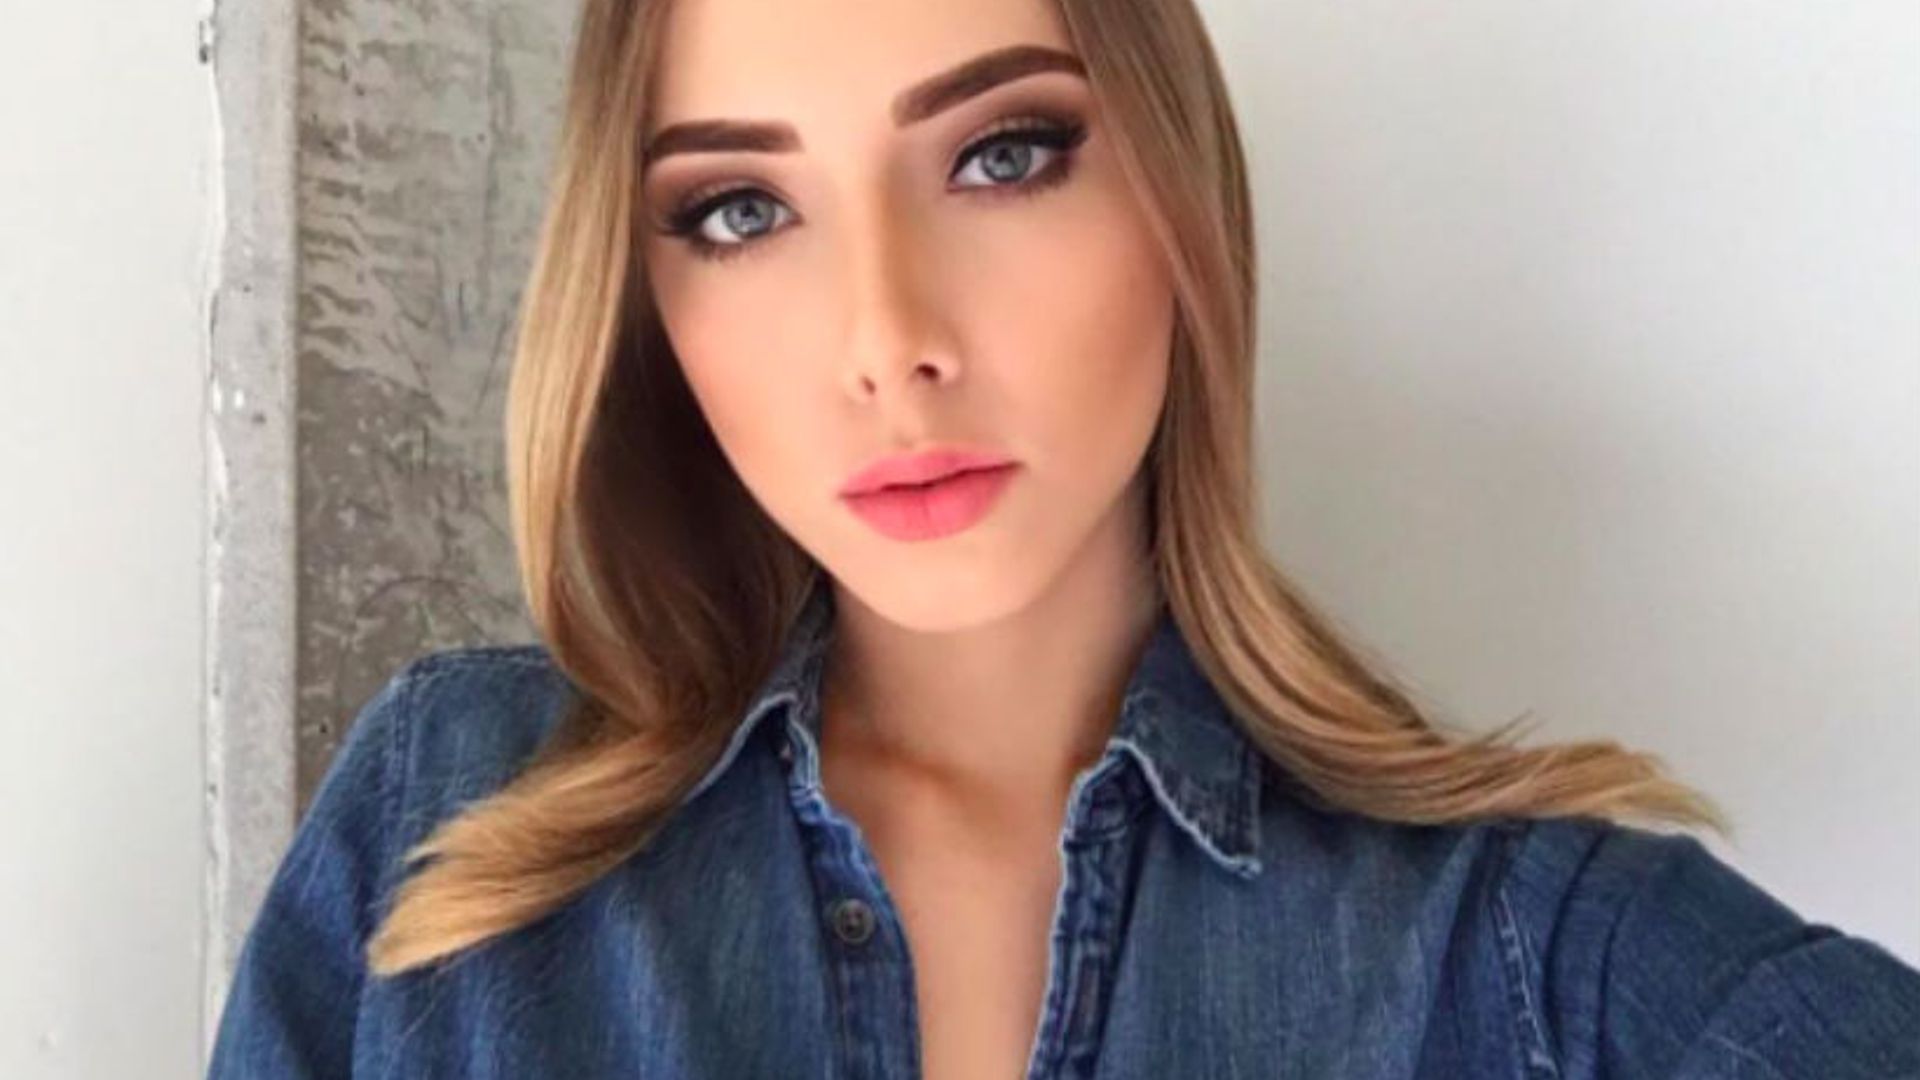 Eminem’s daughter Hailie is so grown up – see the stunning pictures!